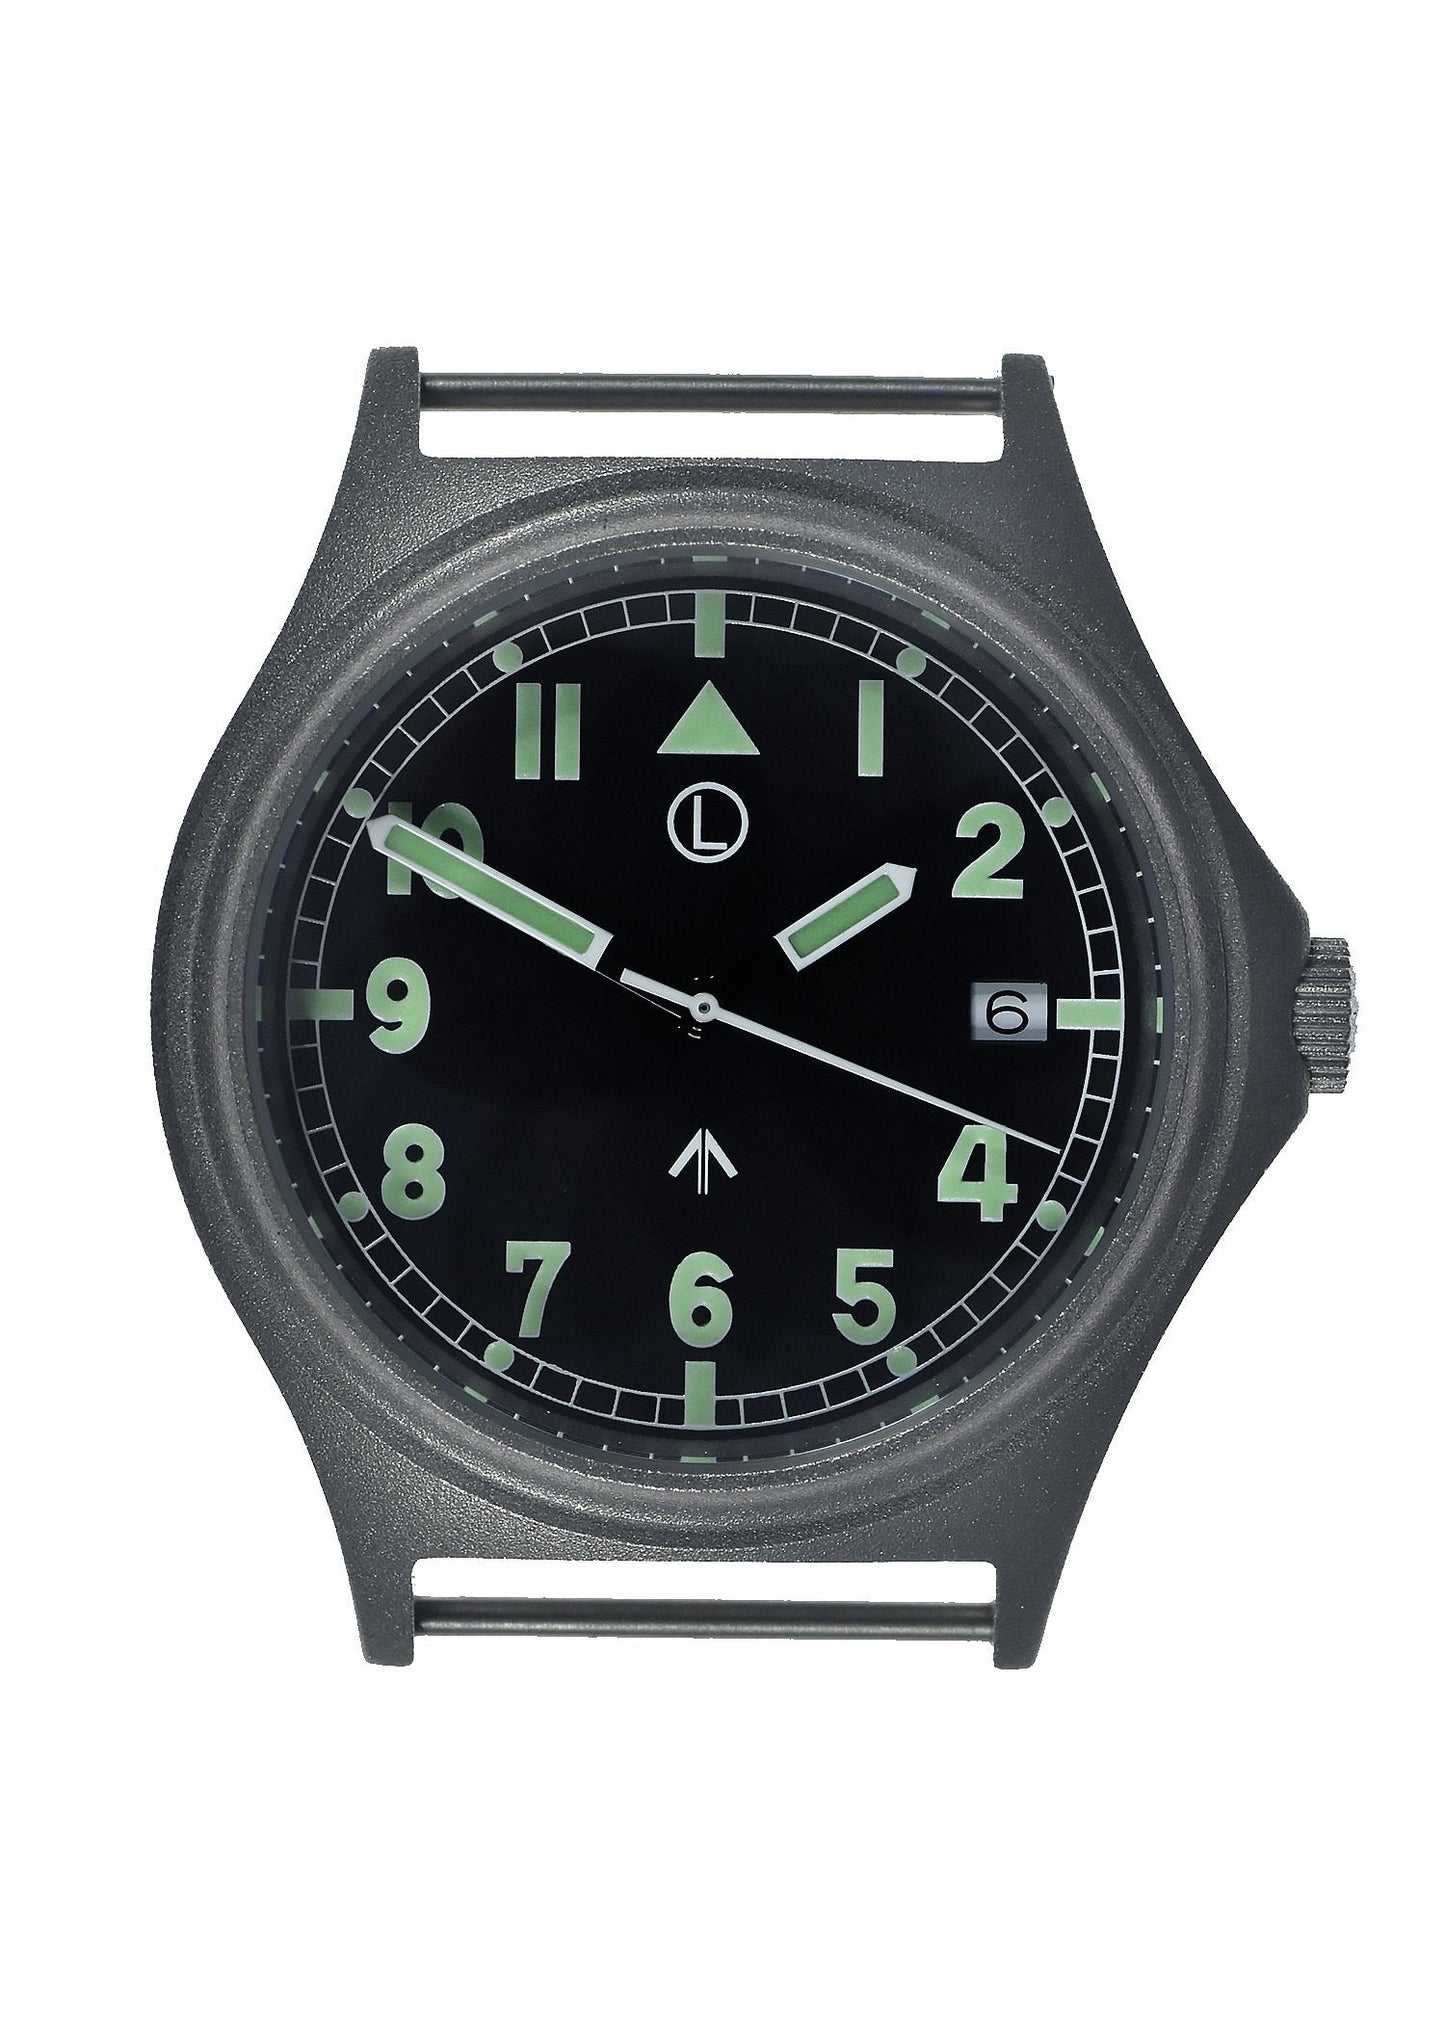 G10 100m Water resistant Military Watch with 12 Hour NATO Pattern Dial in Stainless Steel Case with Screw Crown (Sterile Dial)